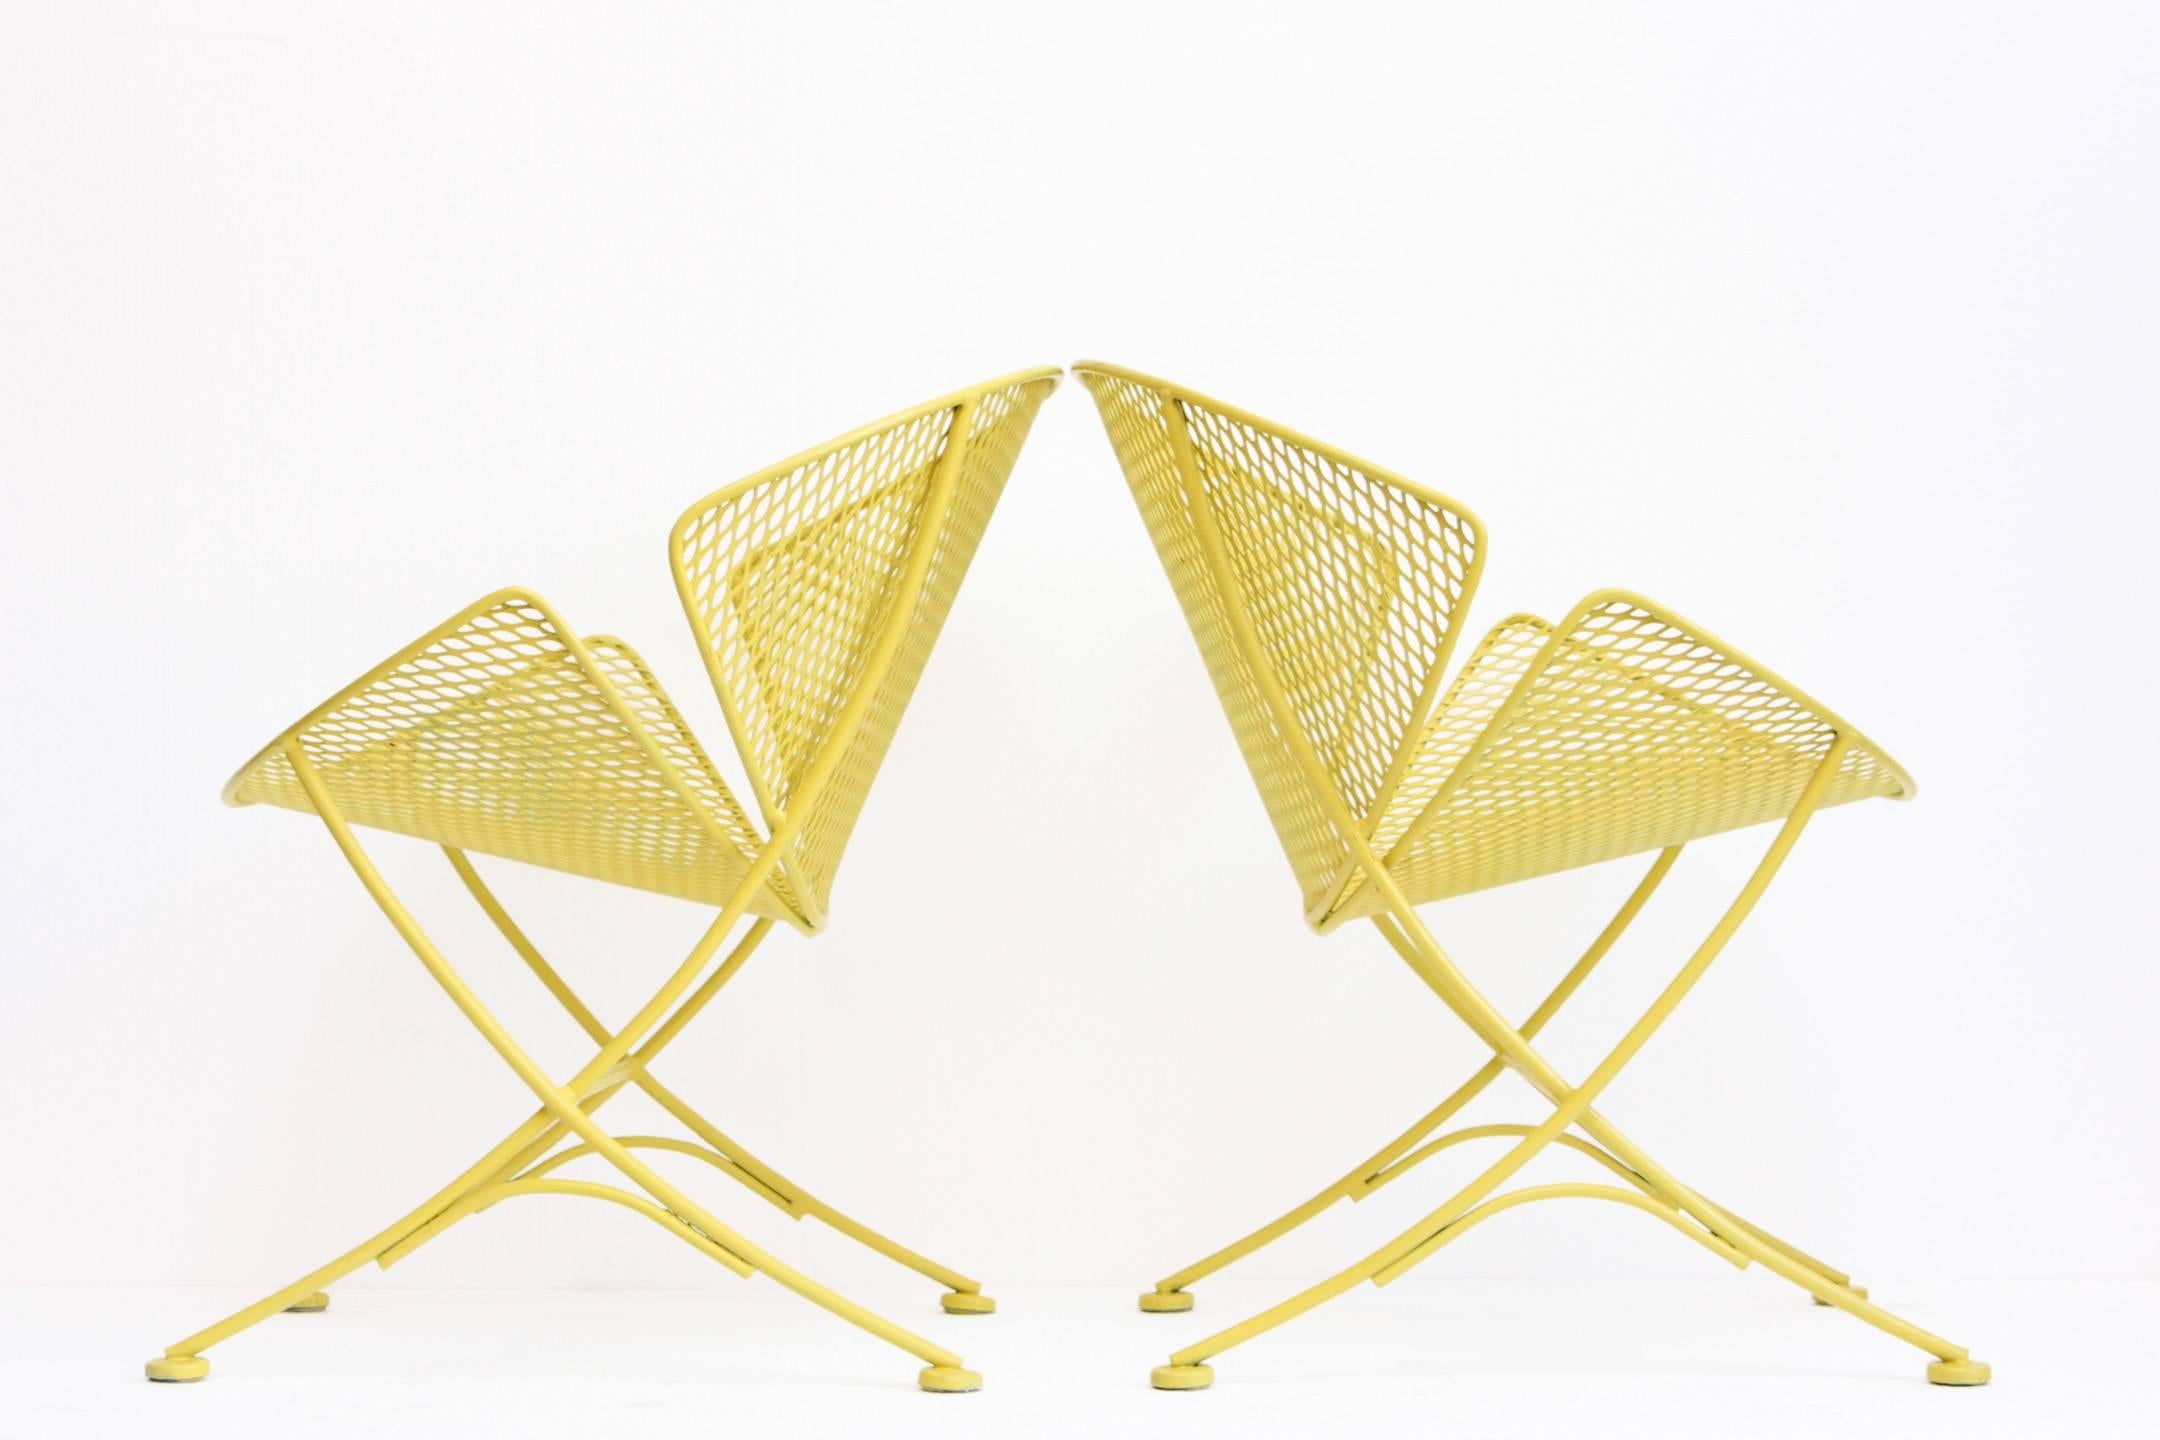 Maurizio Tempestini for Salterini orange slice / clamshell patio set. Two chairs and side table. Mesh + wrought iron, painted yellow. 